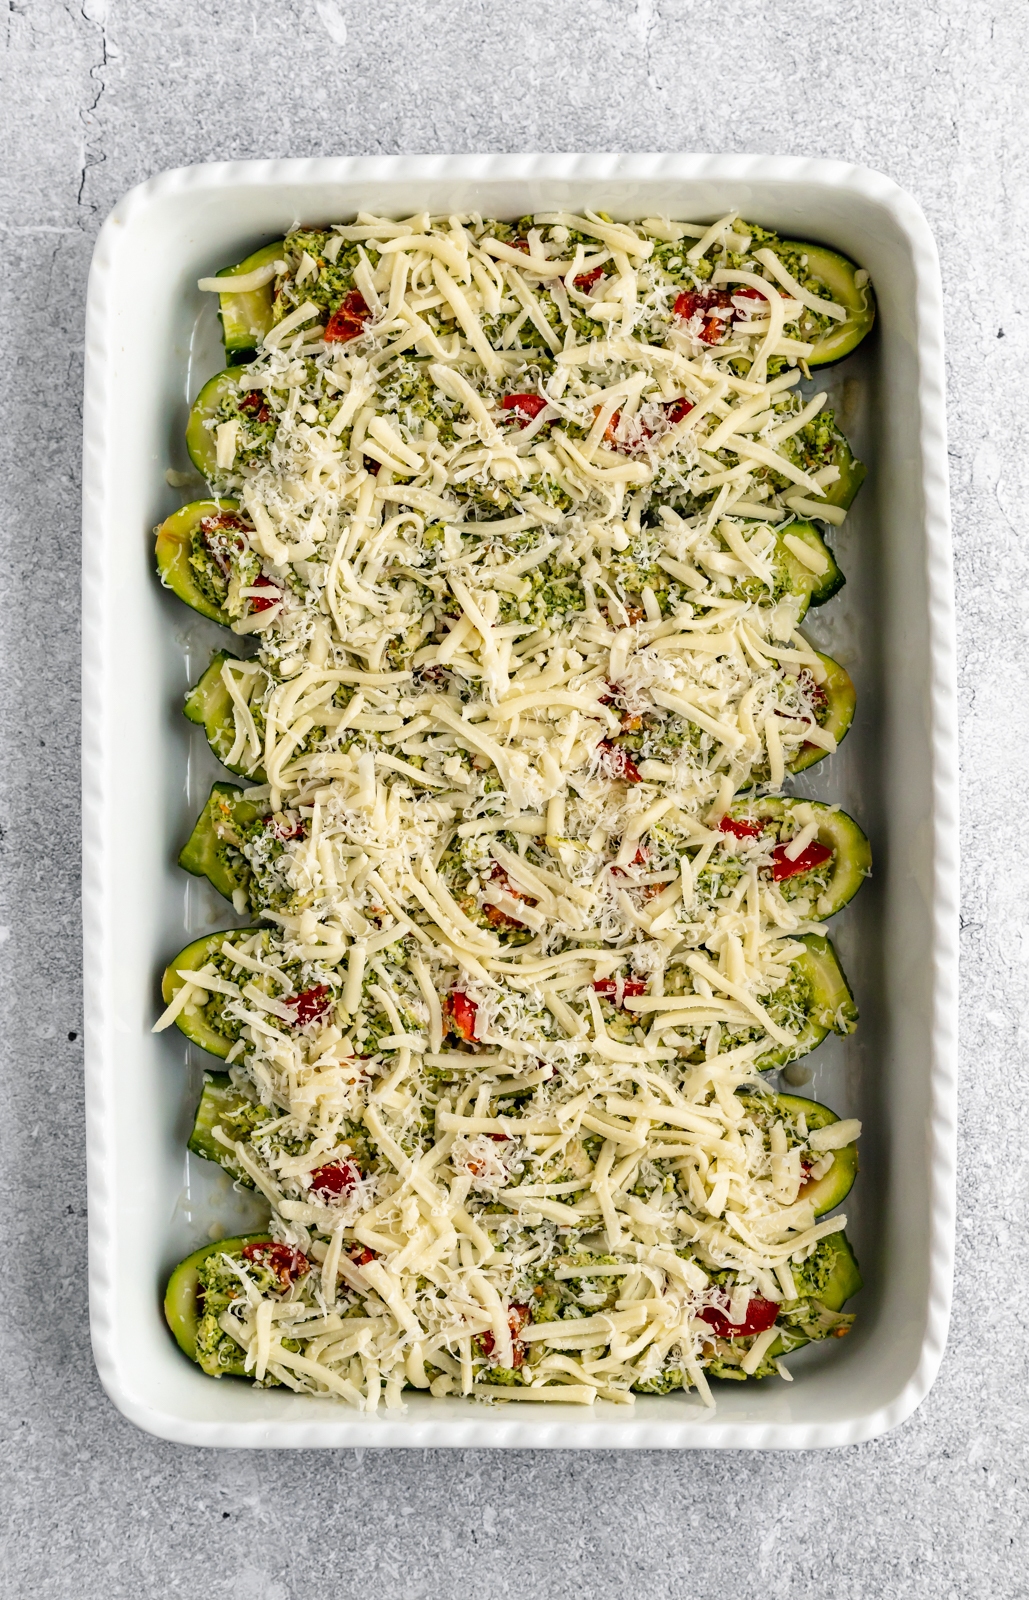 easy pesto chicken zucchini boats unbaked in a baking dish